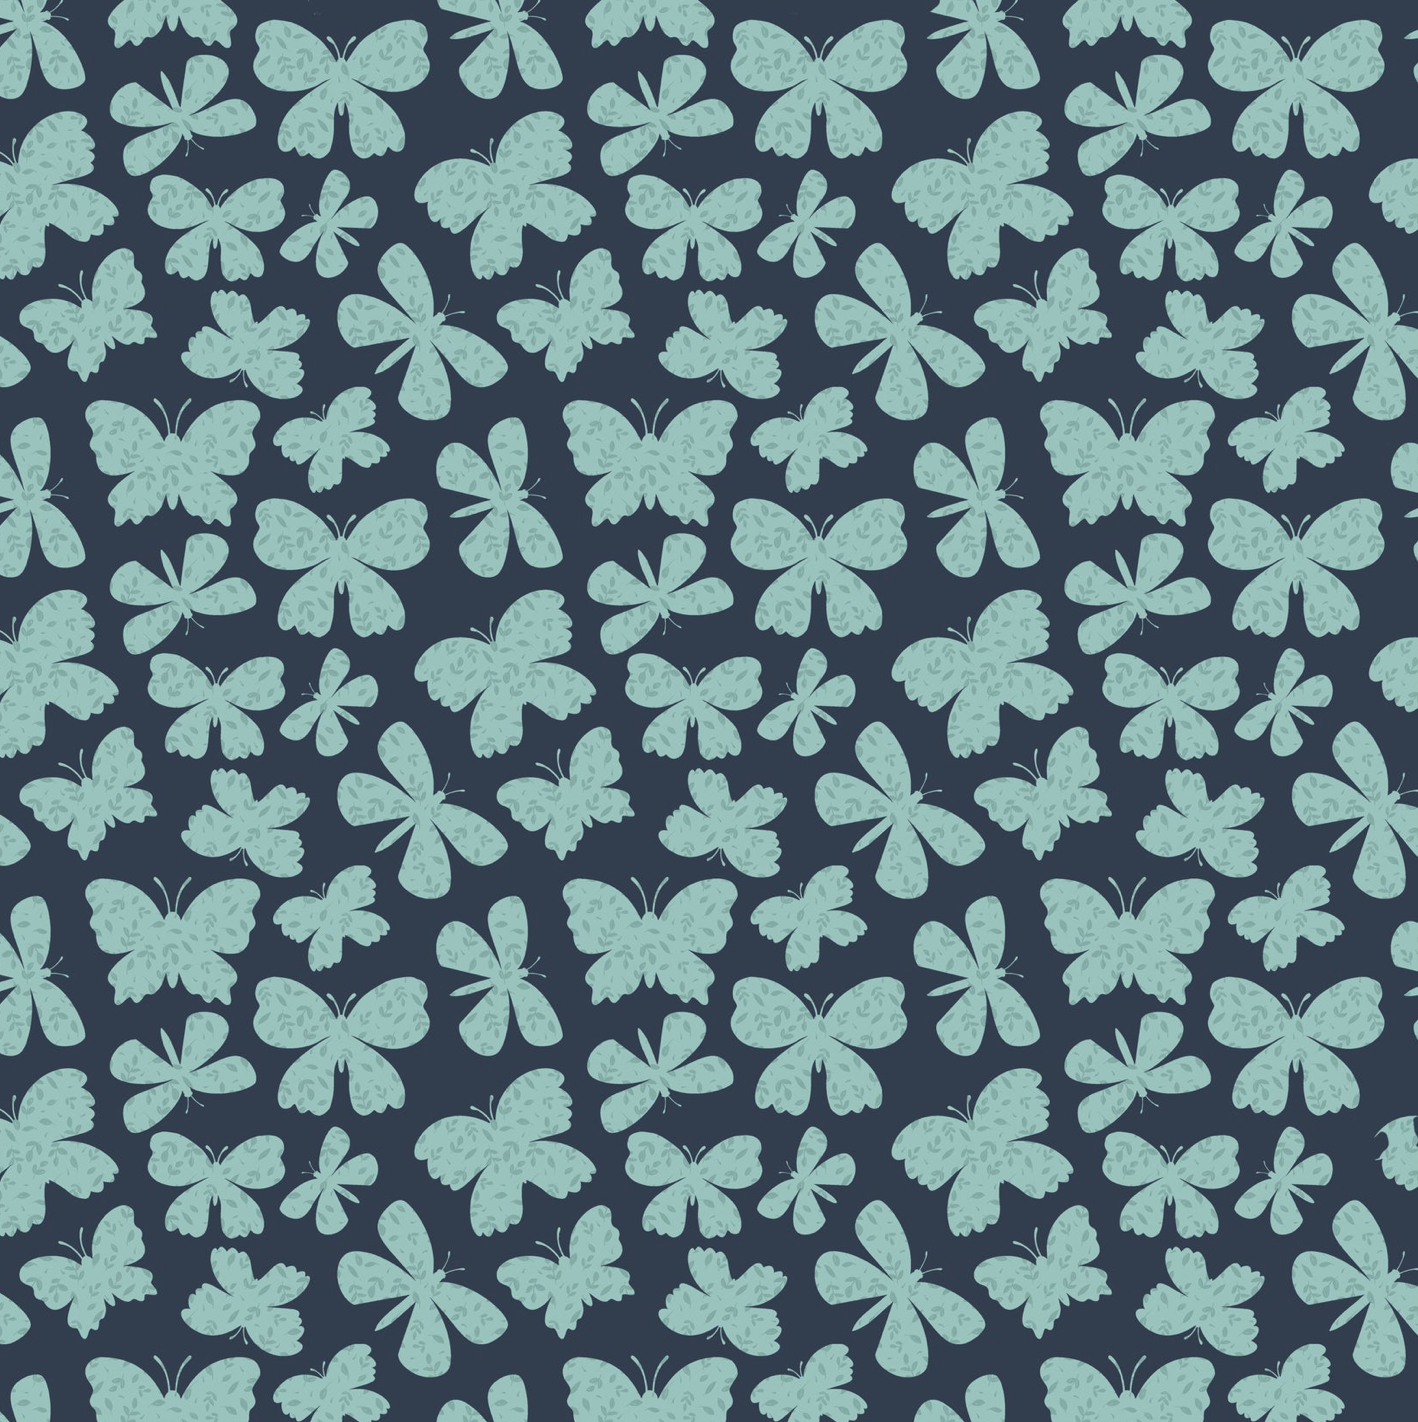 Painted Blossoms Scattered Butterflies Navy PB24656, sold by the 1/2 yard, *PREORDER